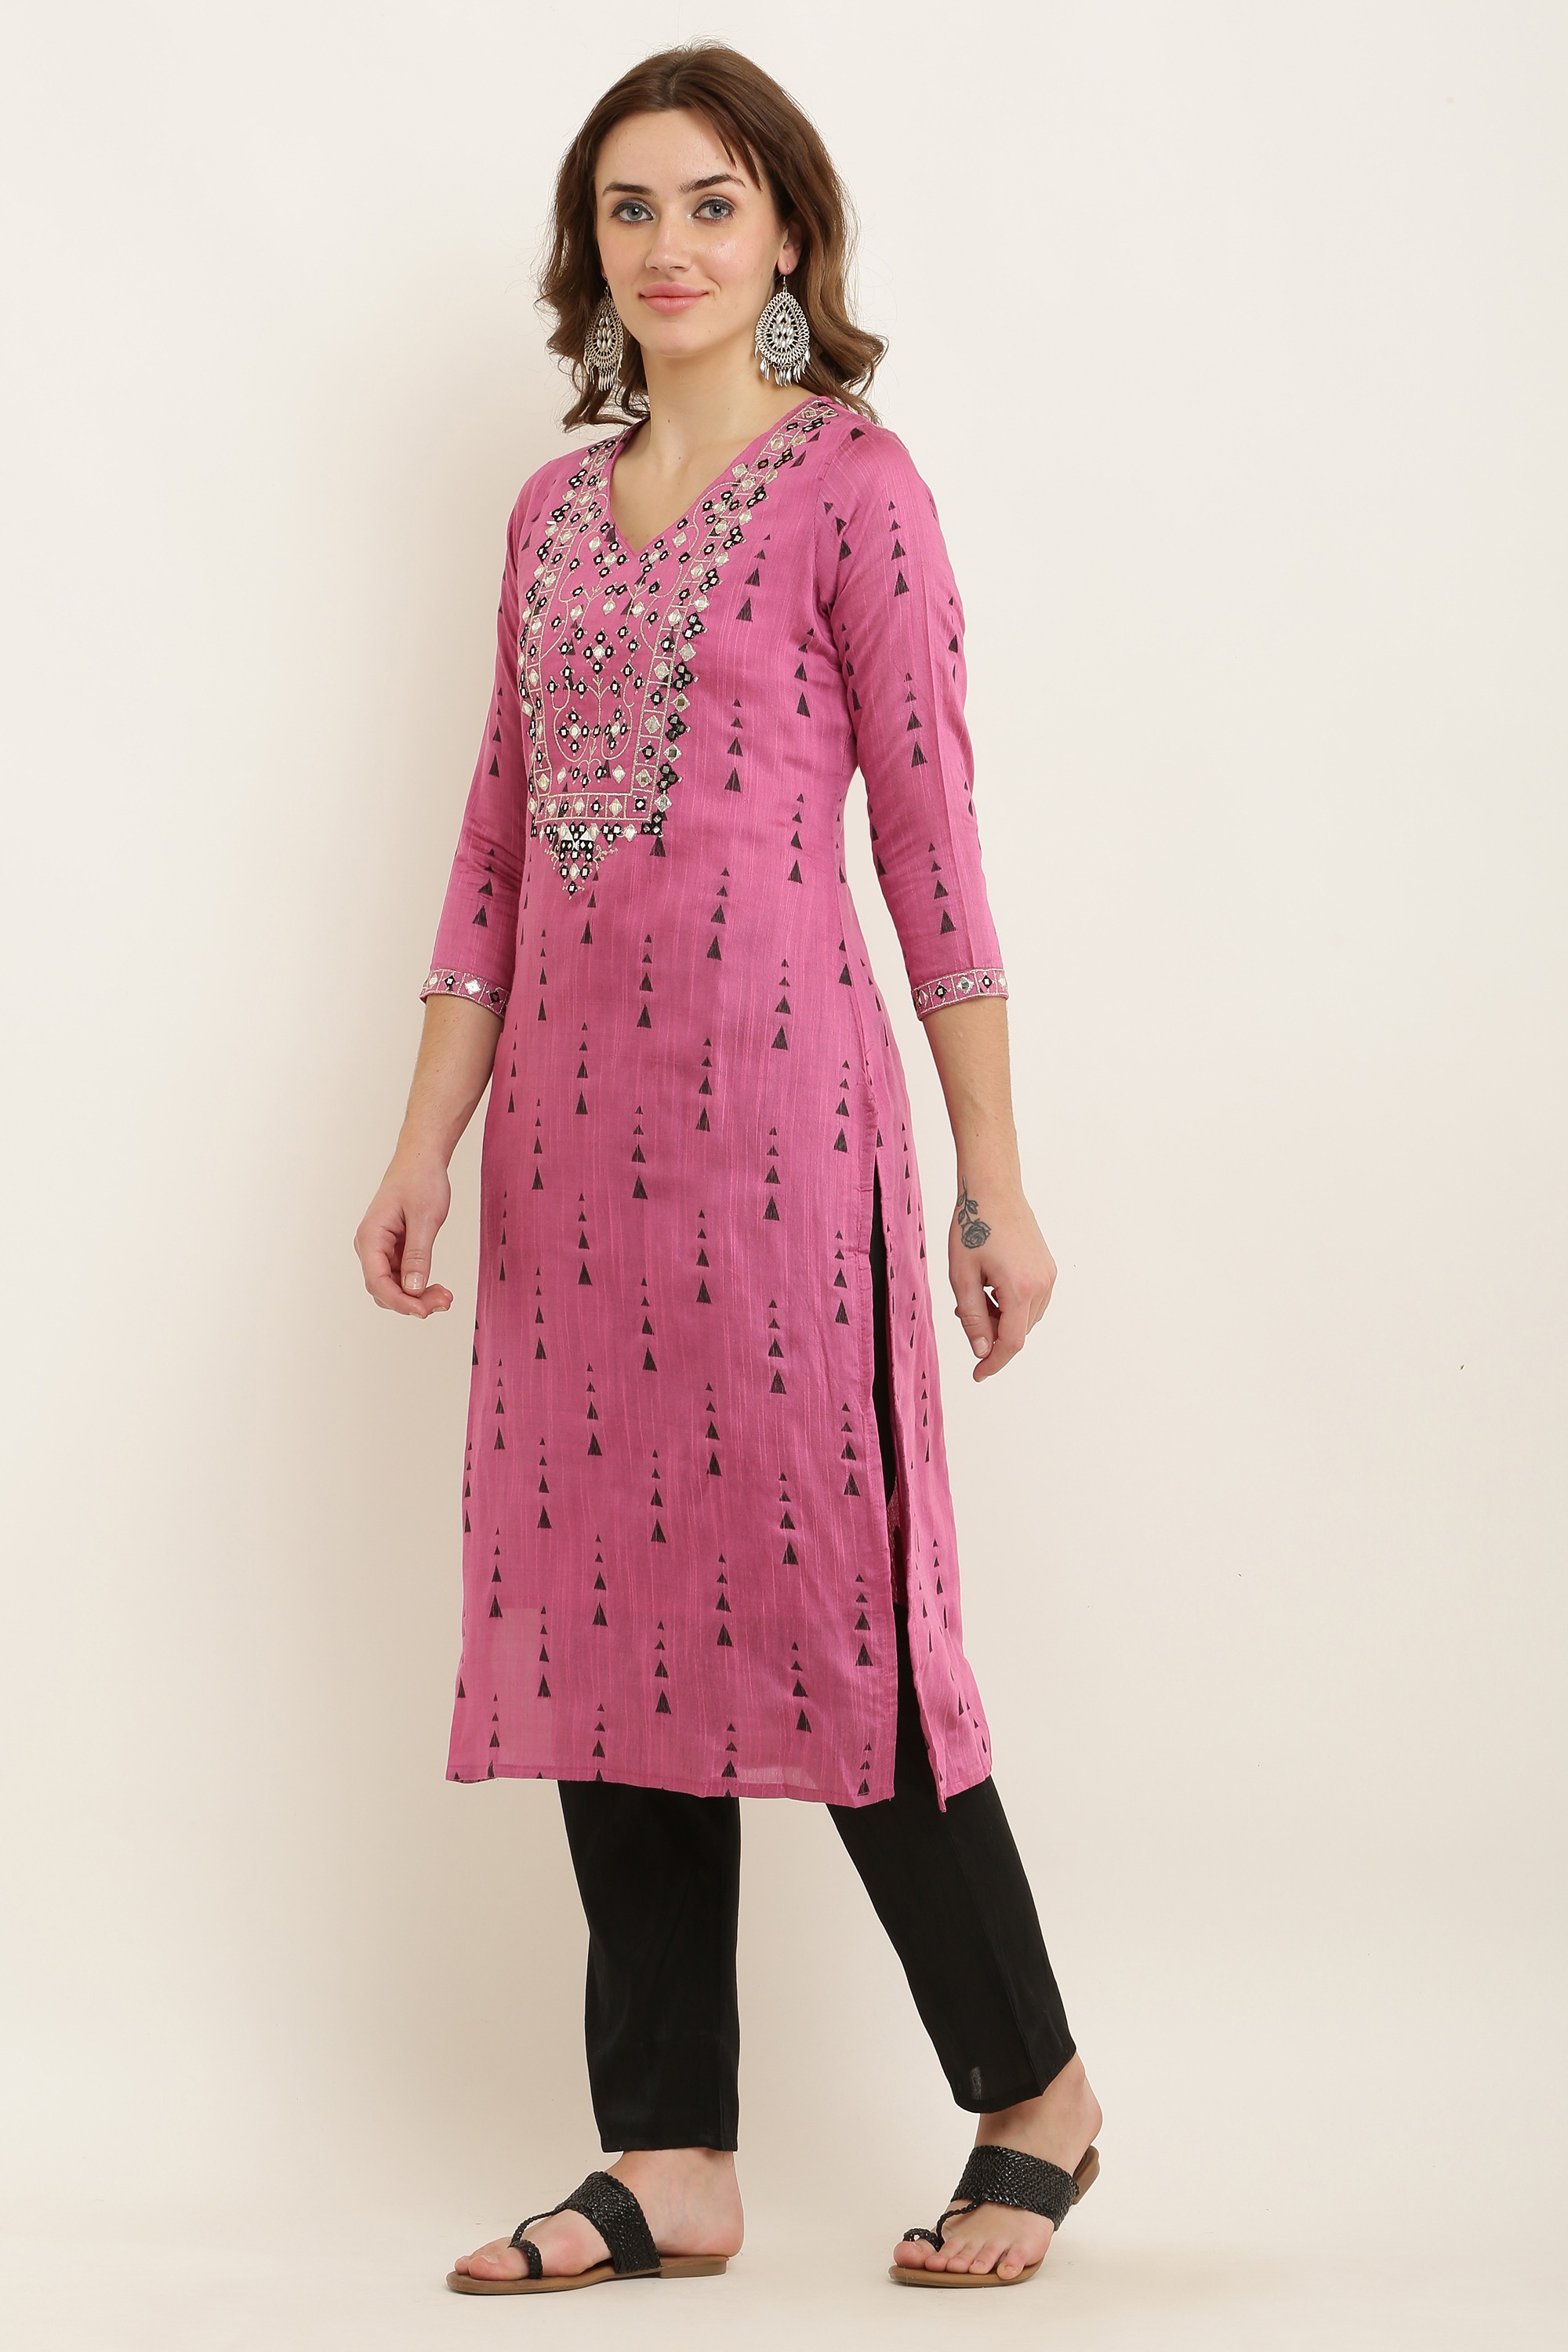 Georgette Kurti With Pant at Rs 1300/piece | Kurti With Pants in Surat |  ID: 2849228337197